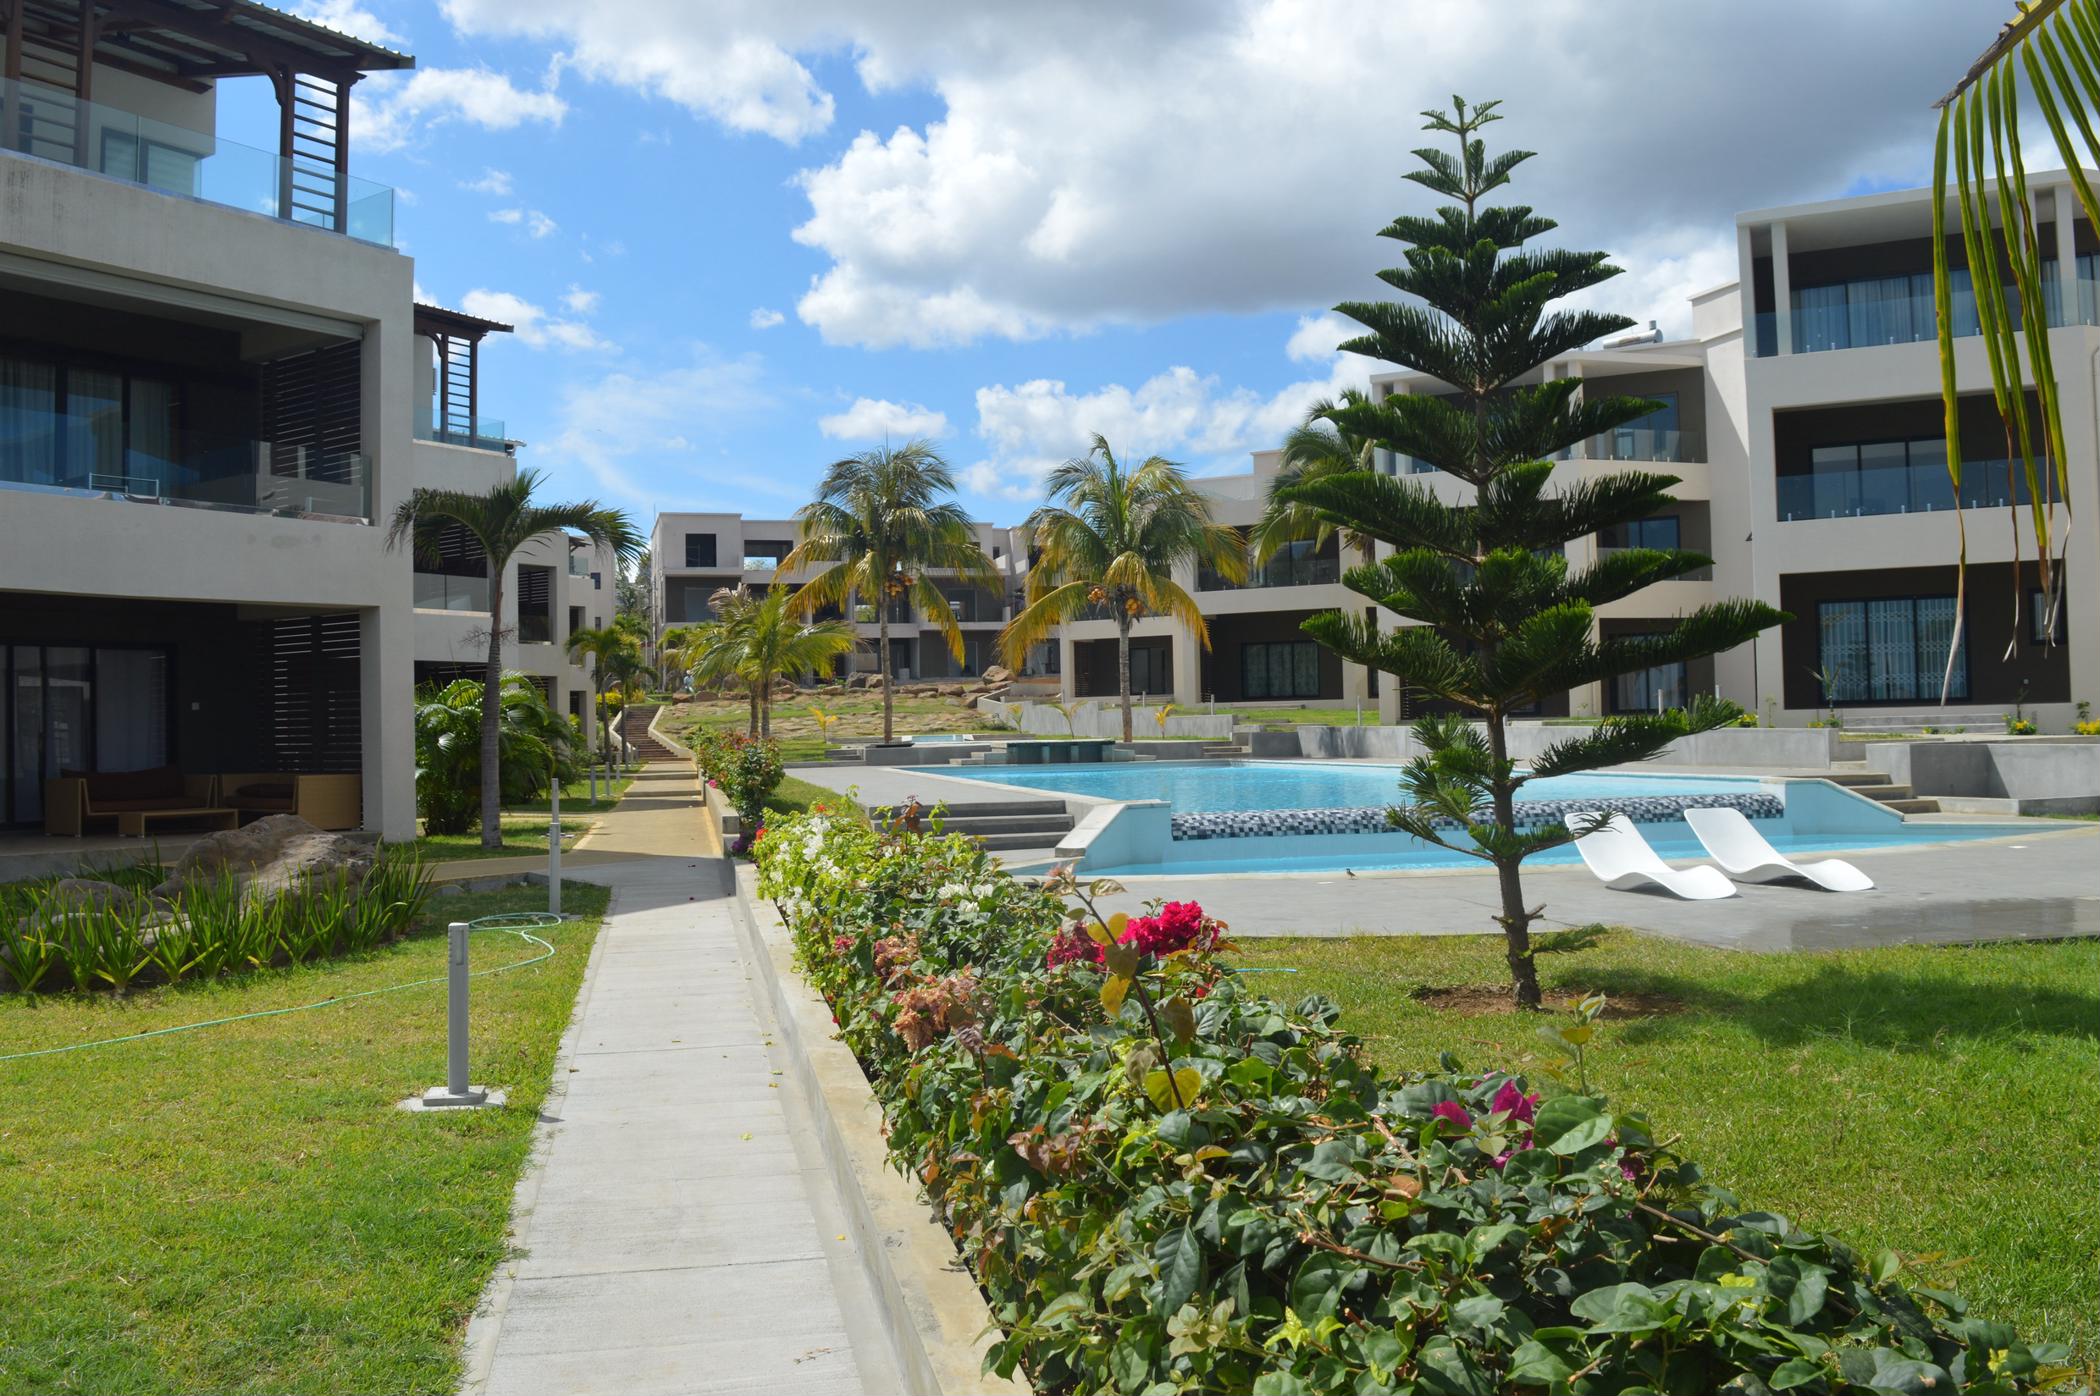 3 bedroom apartment for sale in Flic en Flac (Mauritius)